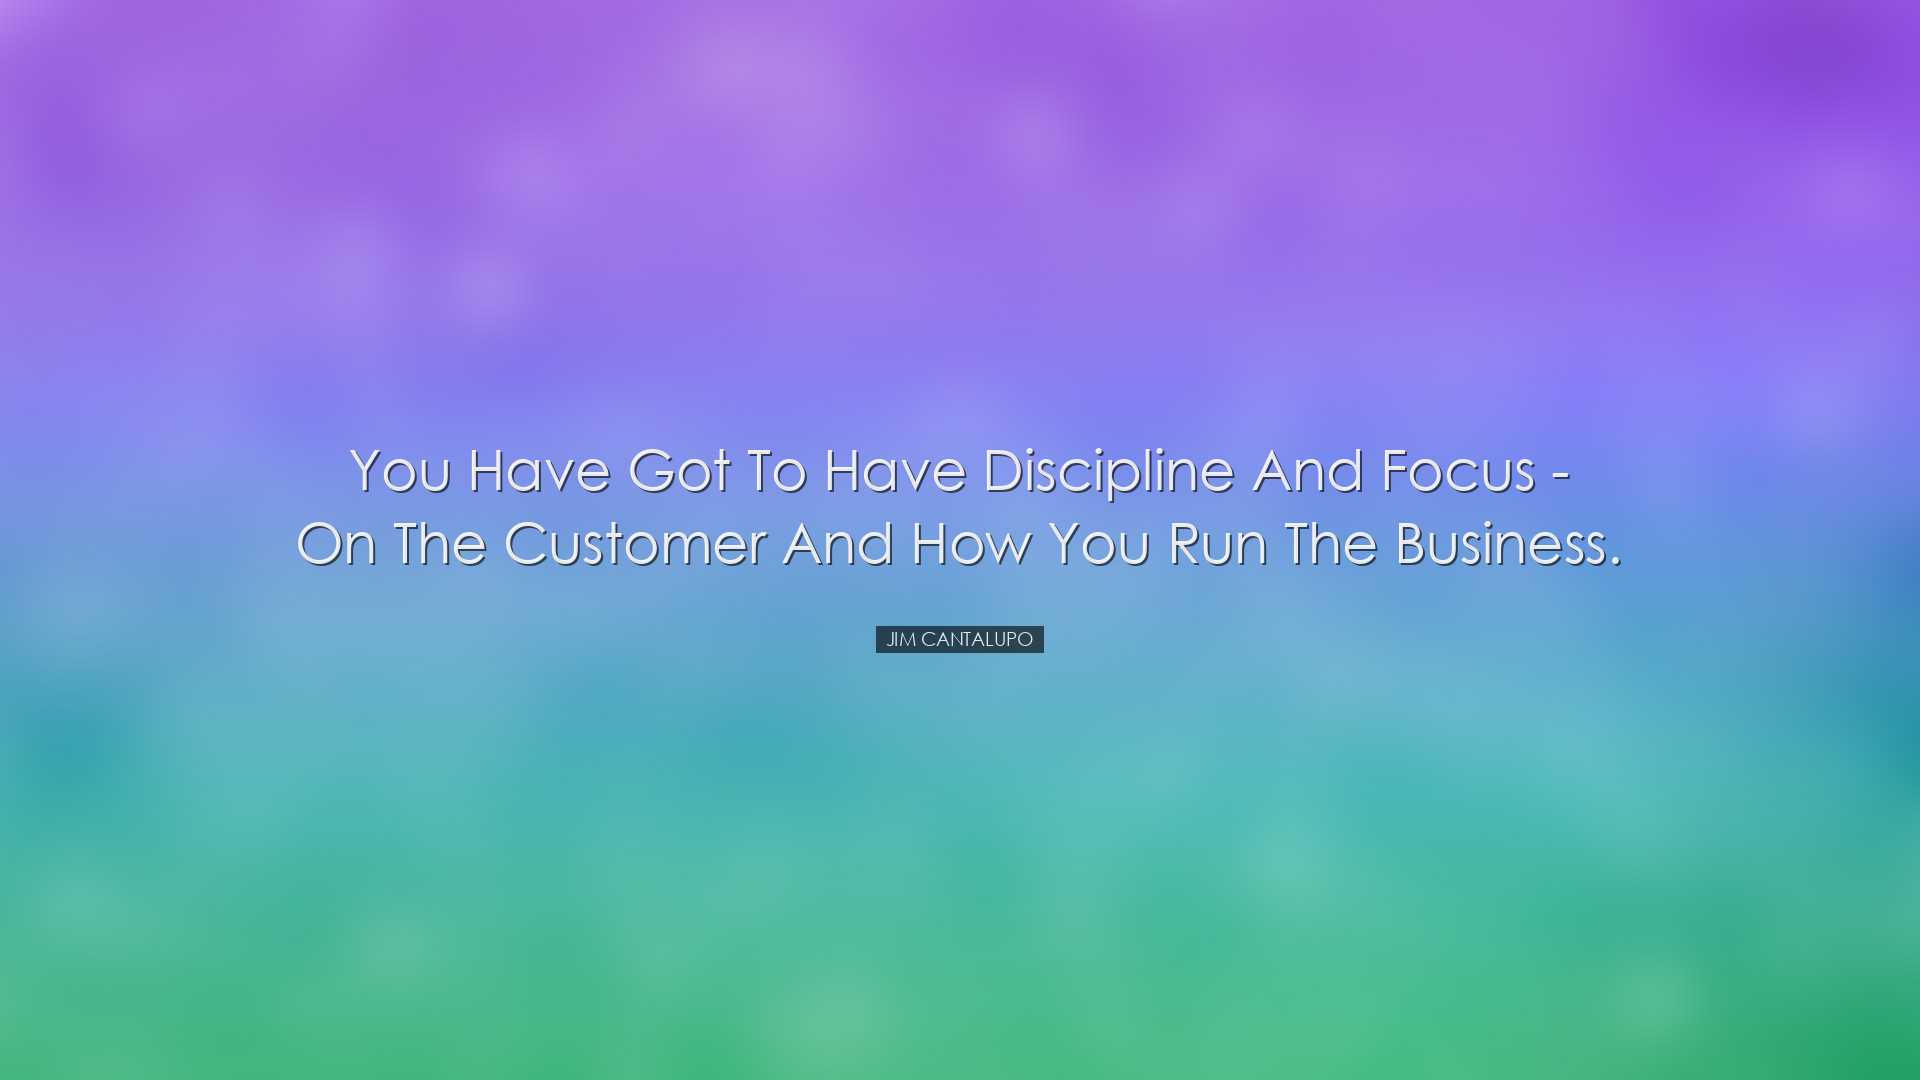 You have got to have discipline and focus - on the customer and ho